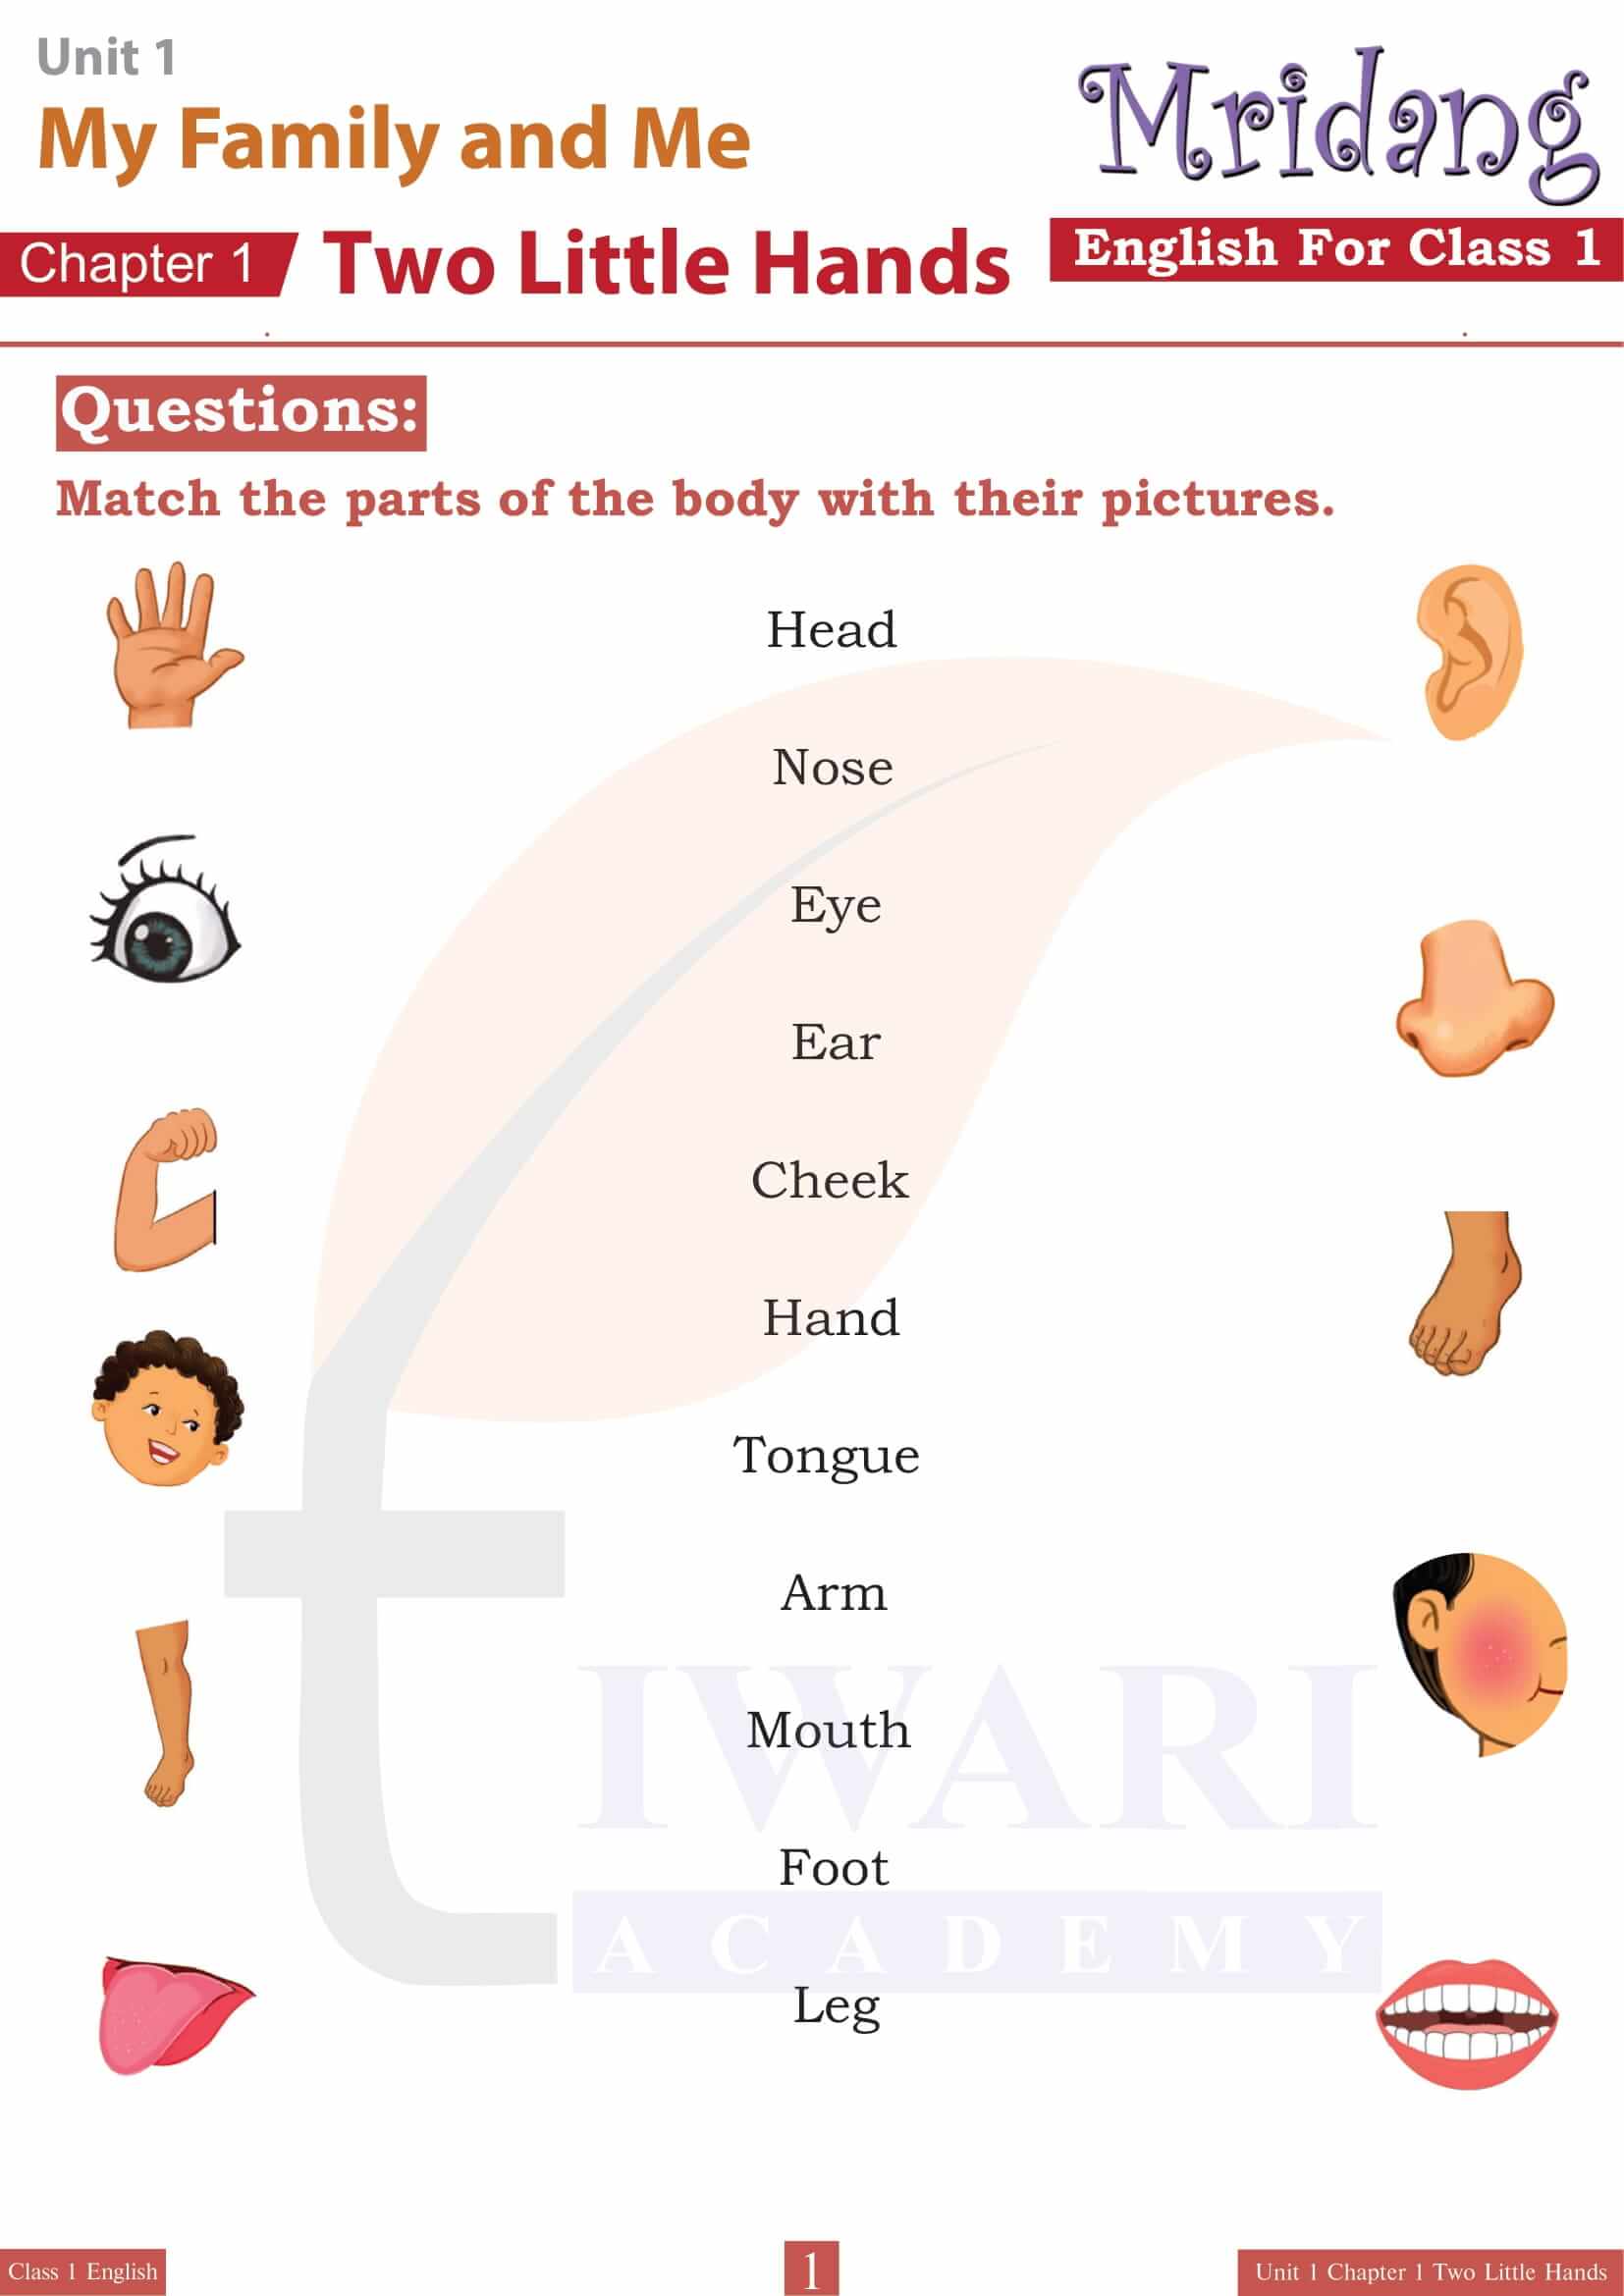 NCERT Solutions for Class 1 English Mridang Chapter 1 Two Little Hands of Unit 1 My Family and Me